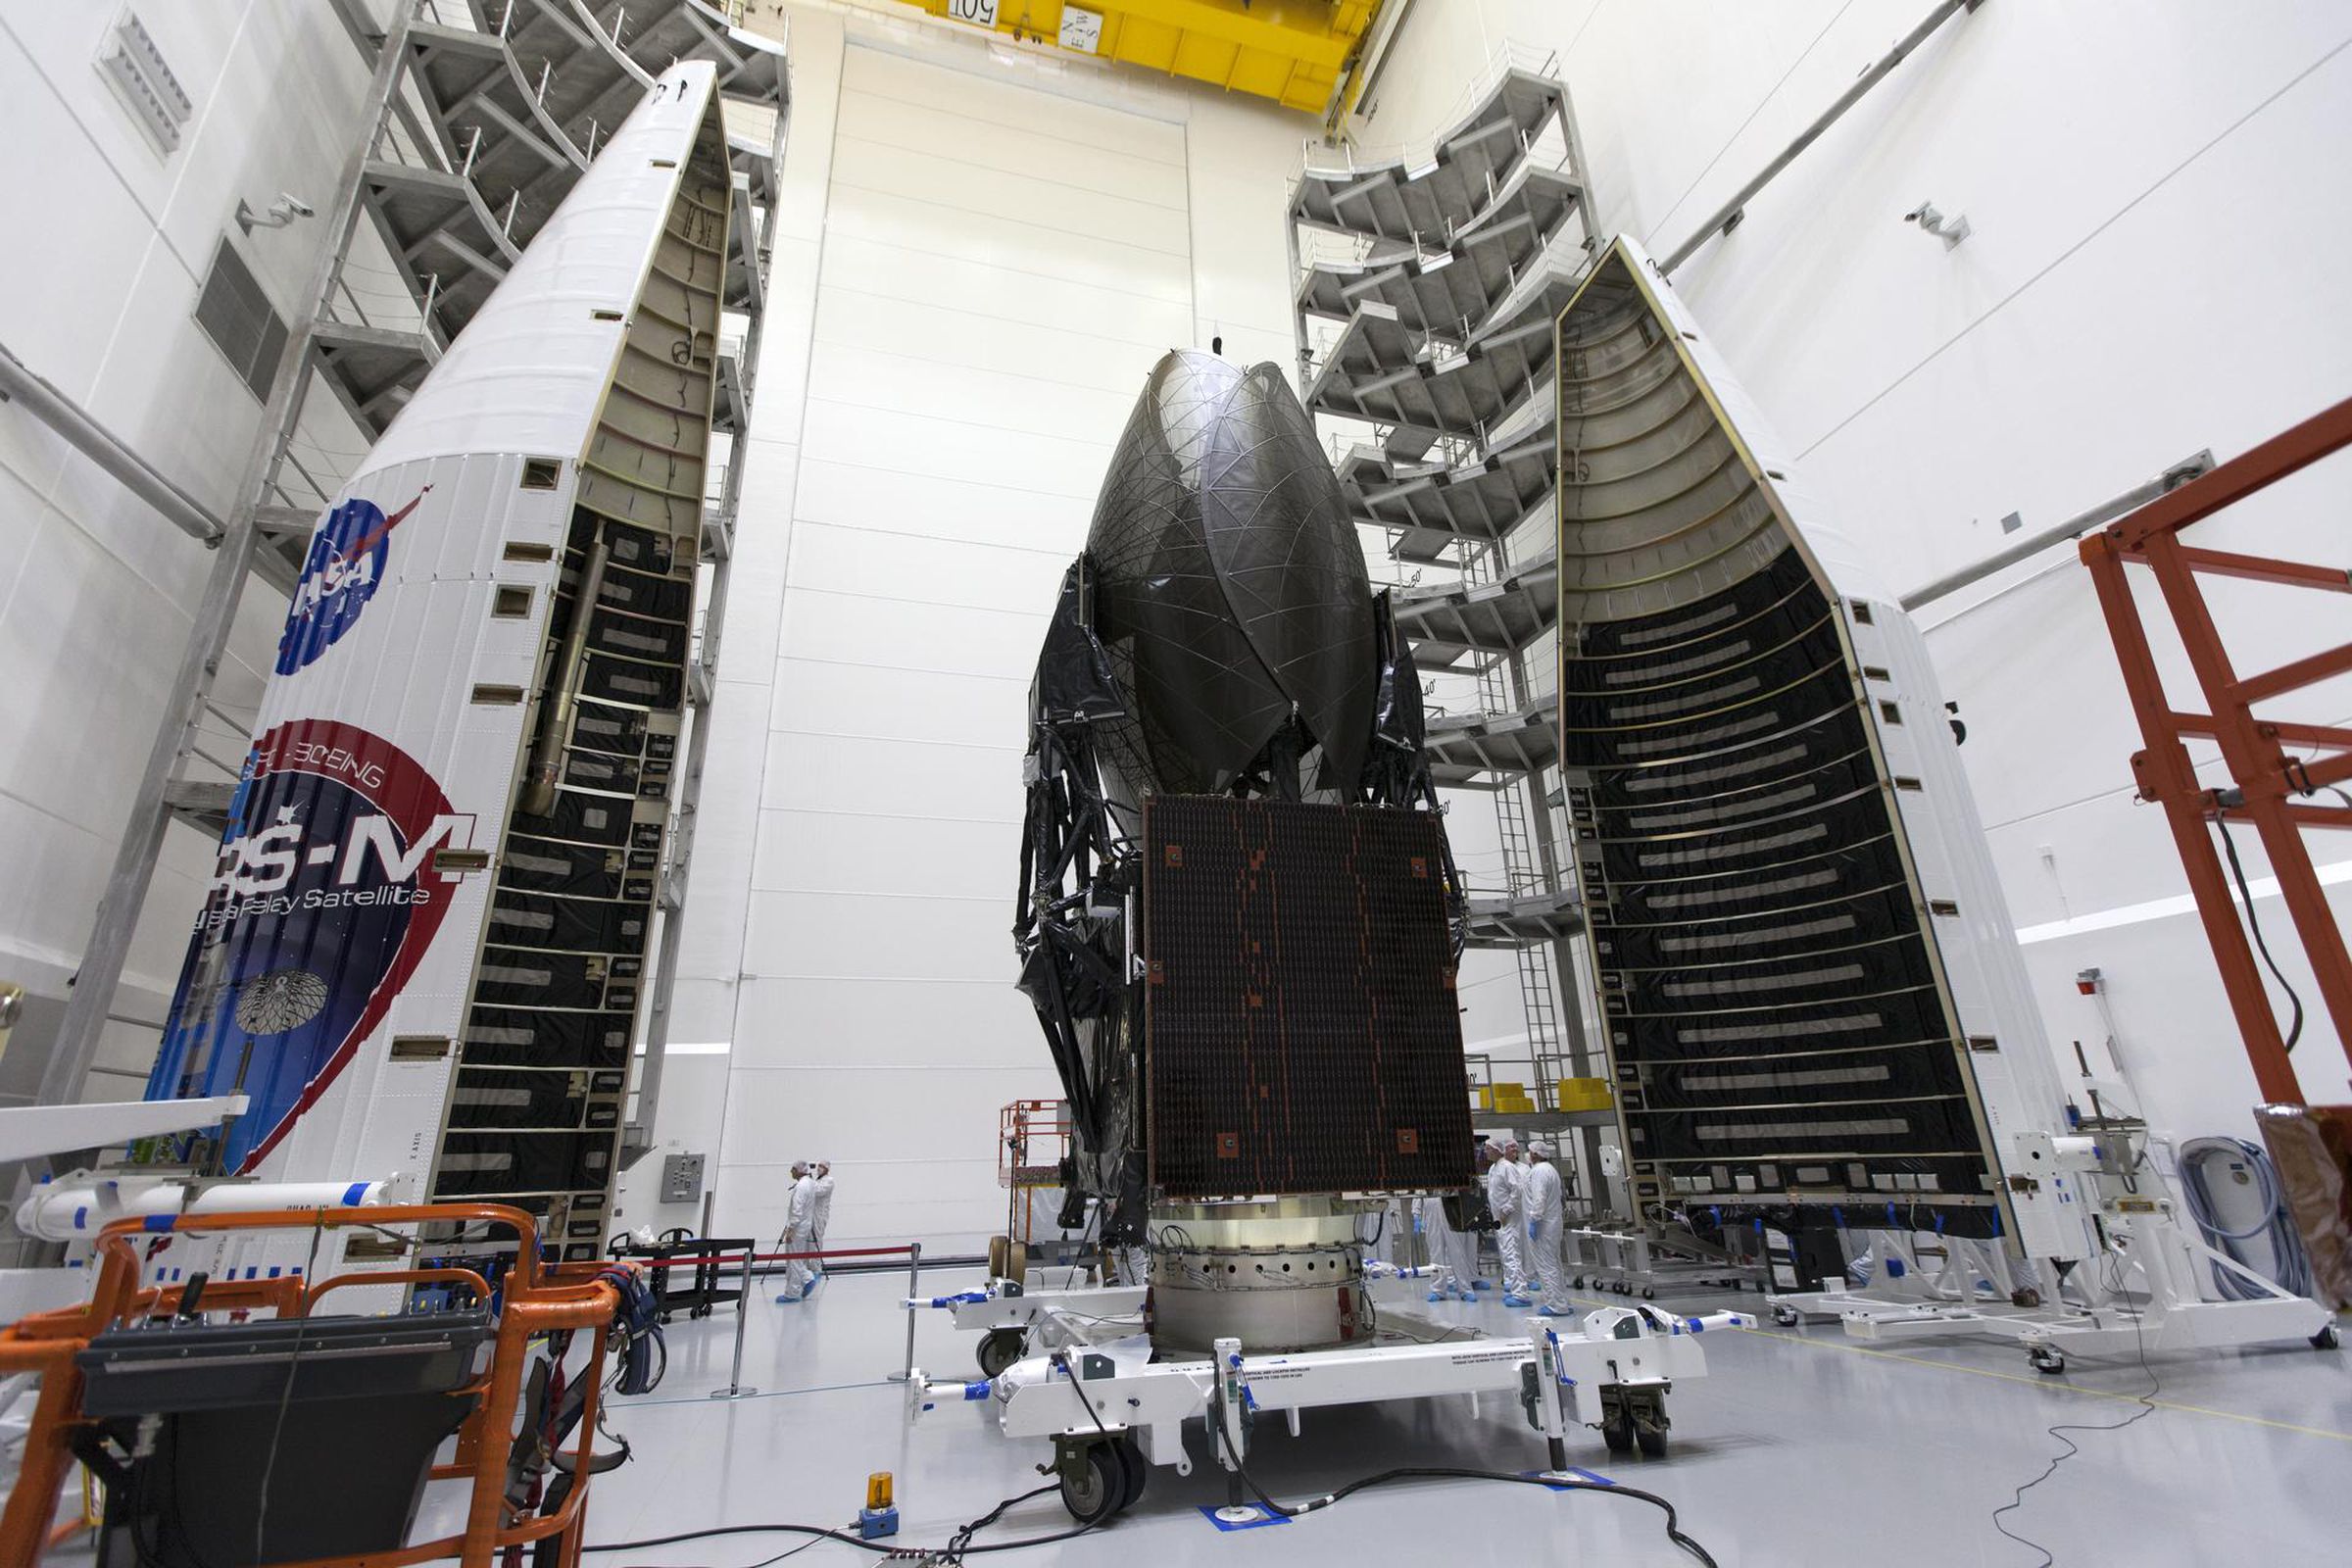 The TDRS-M satellite before getting enclosed in the Atlas V nose cone.